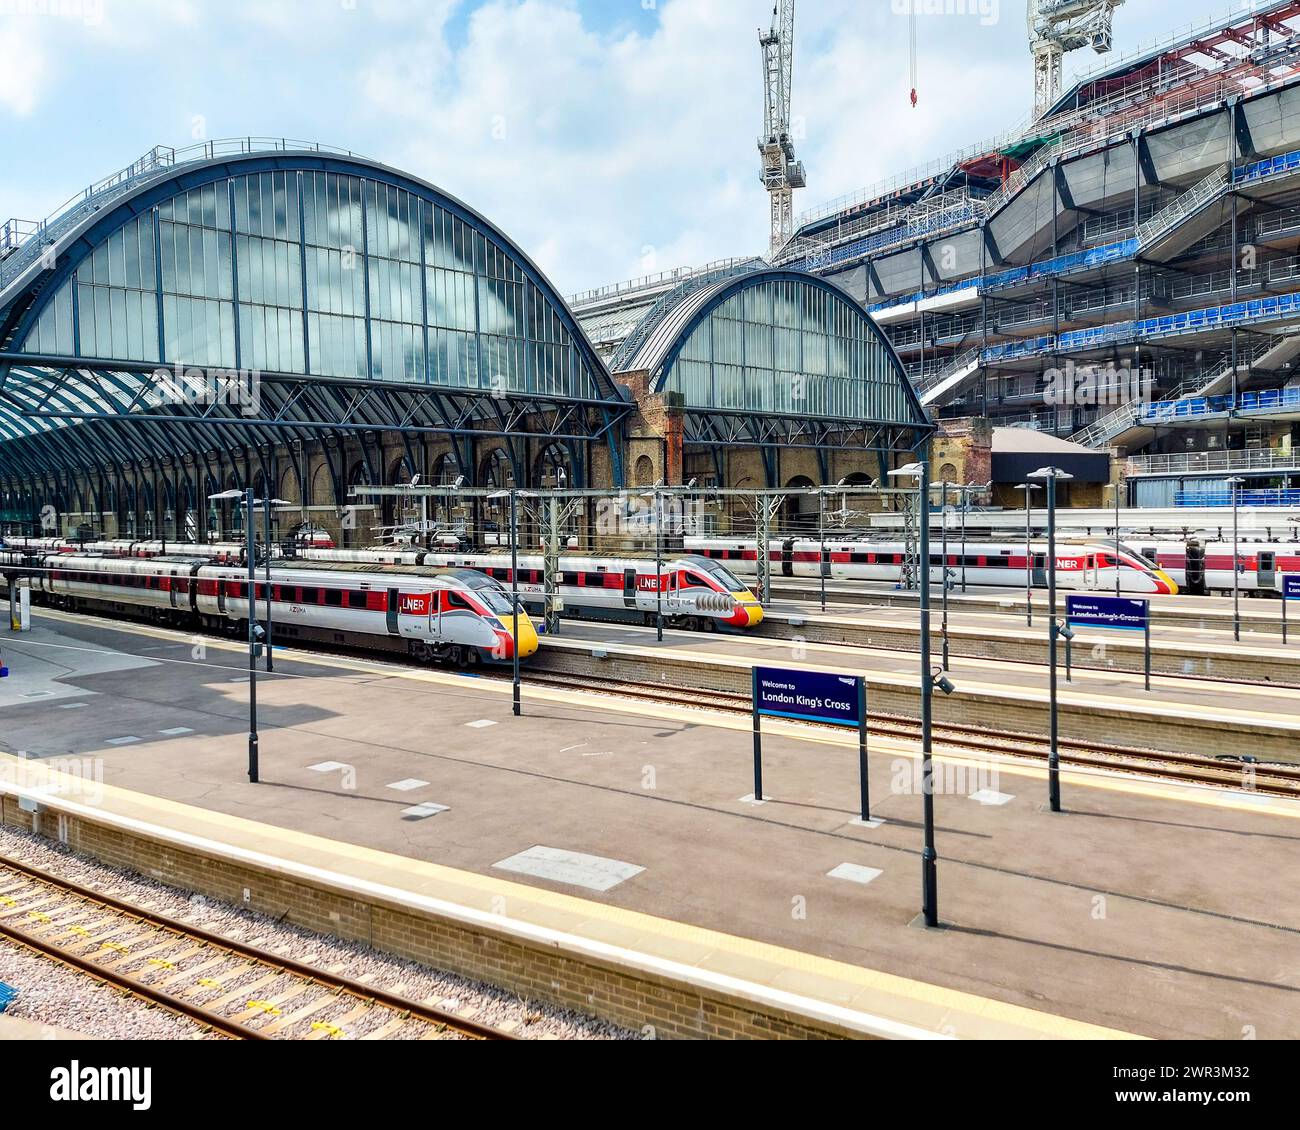 Platforms and trains at Kings Cross Station railway in London Stock Photo